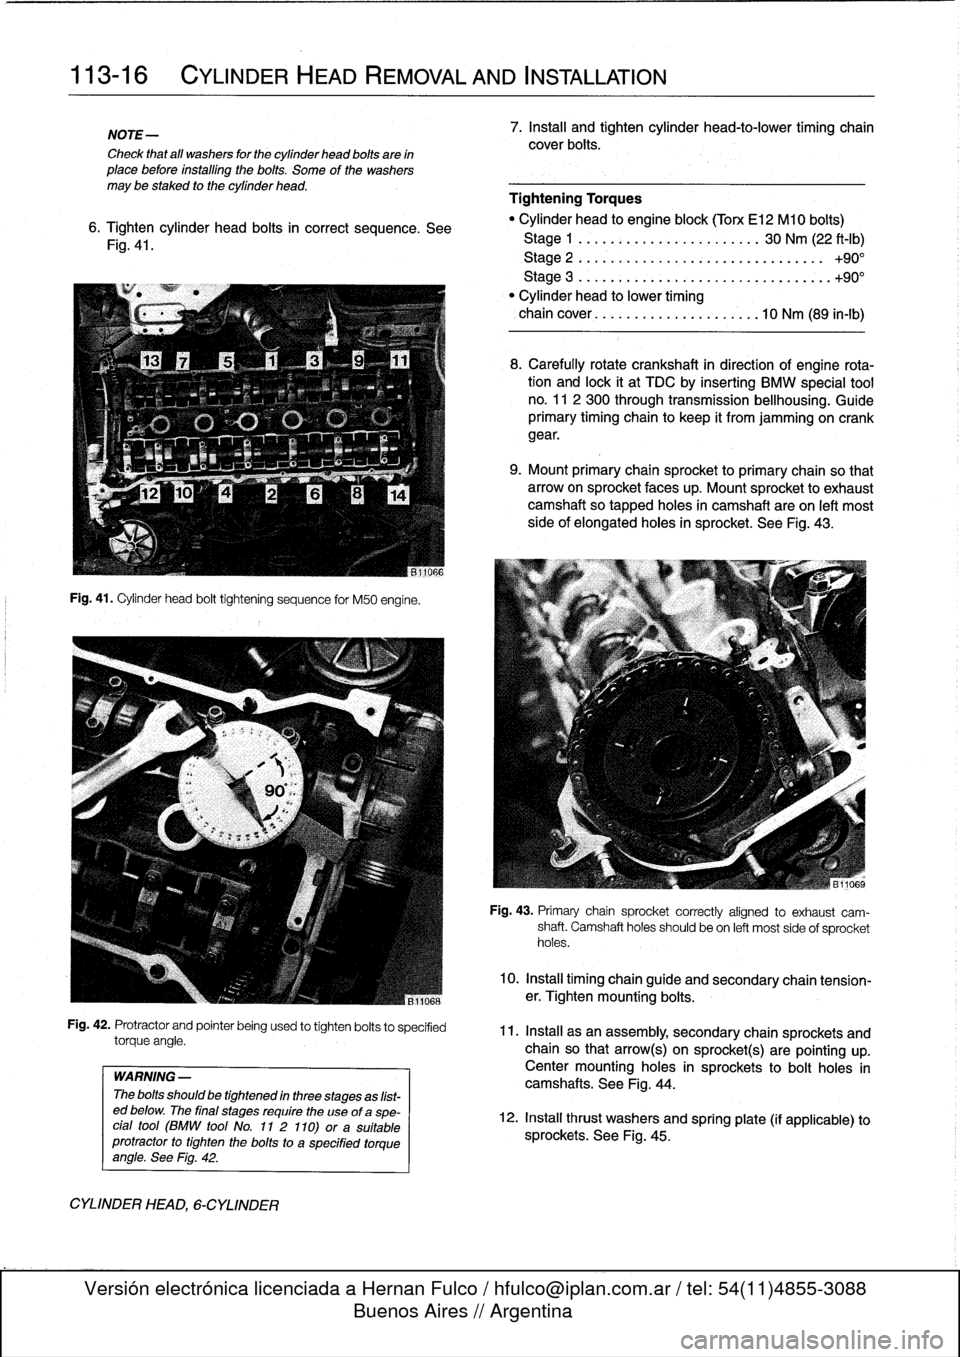 BMW 323i 1993 E36 Manual Online 
113-16

	

CYLINDER
HEAD
REMOVAL
AND
INSTALLATION

NOTE-

Check
that
all
washers
for
the
cylinder
head
bolts
are
in
place
before
installlng
the
bolts
.
Some
of
the
washers
may
be
staked
to
the
cylind